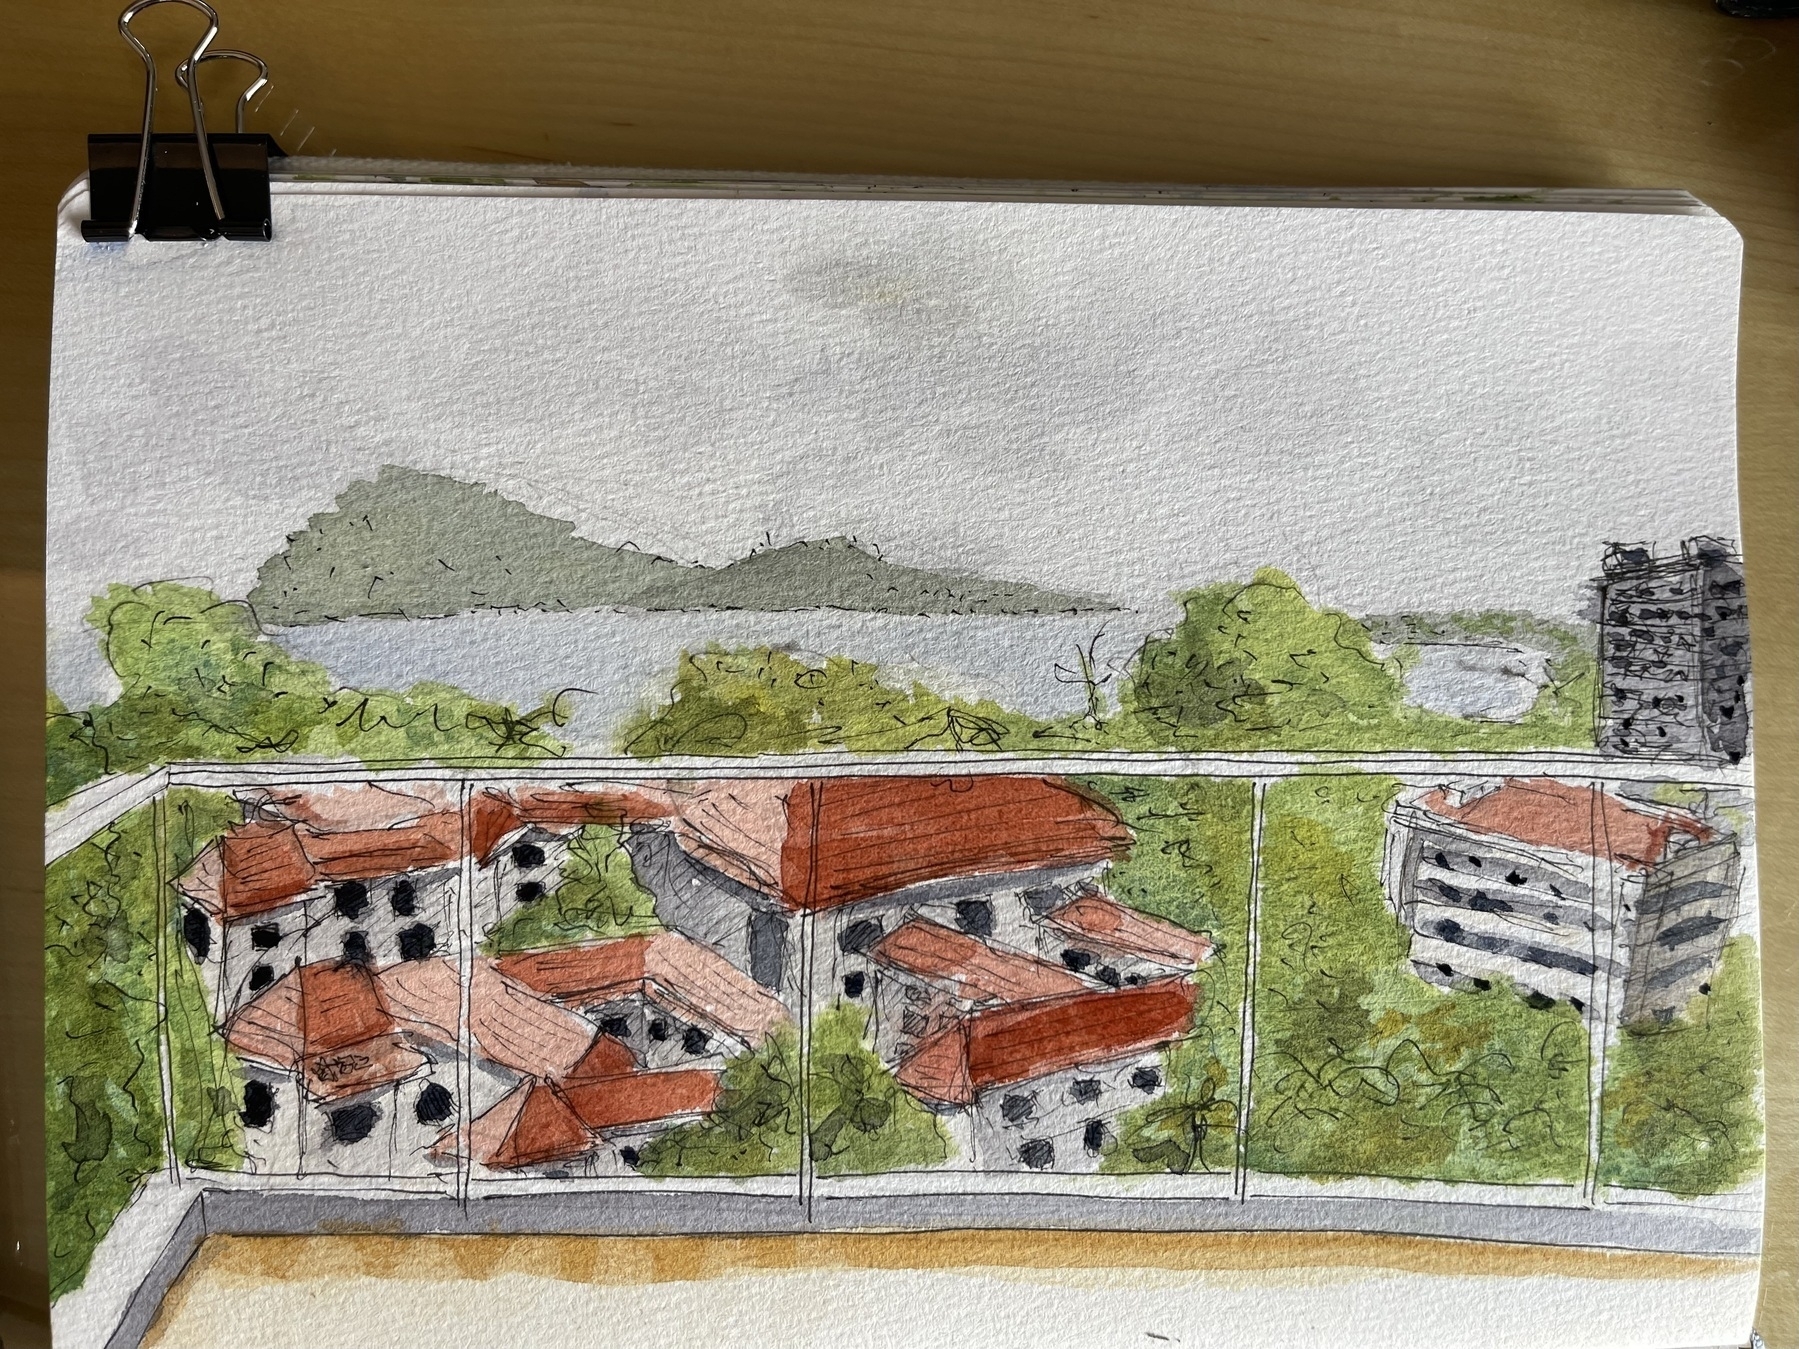 Watercolour of a bay in Langkawi, Malaysia